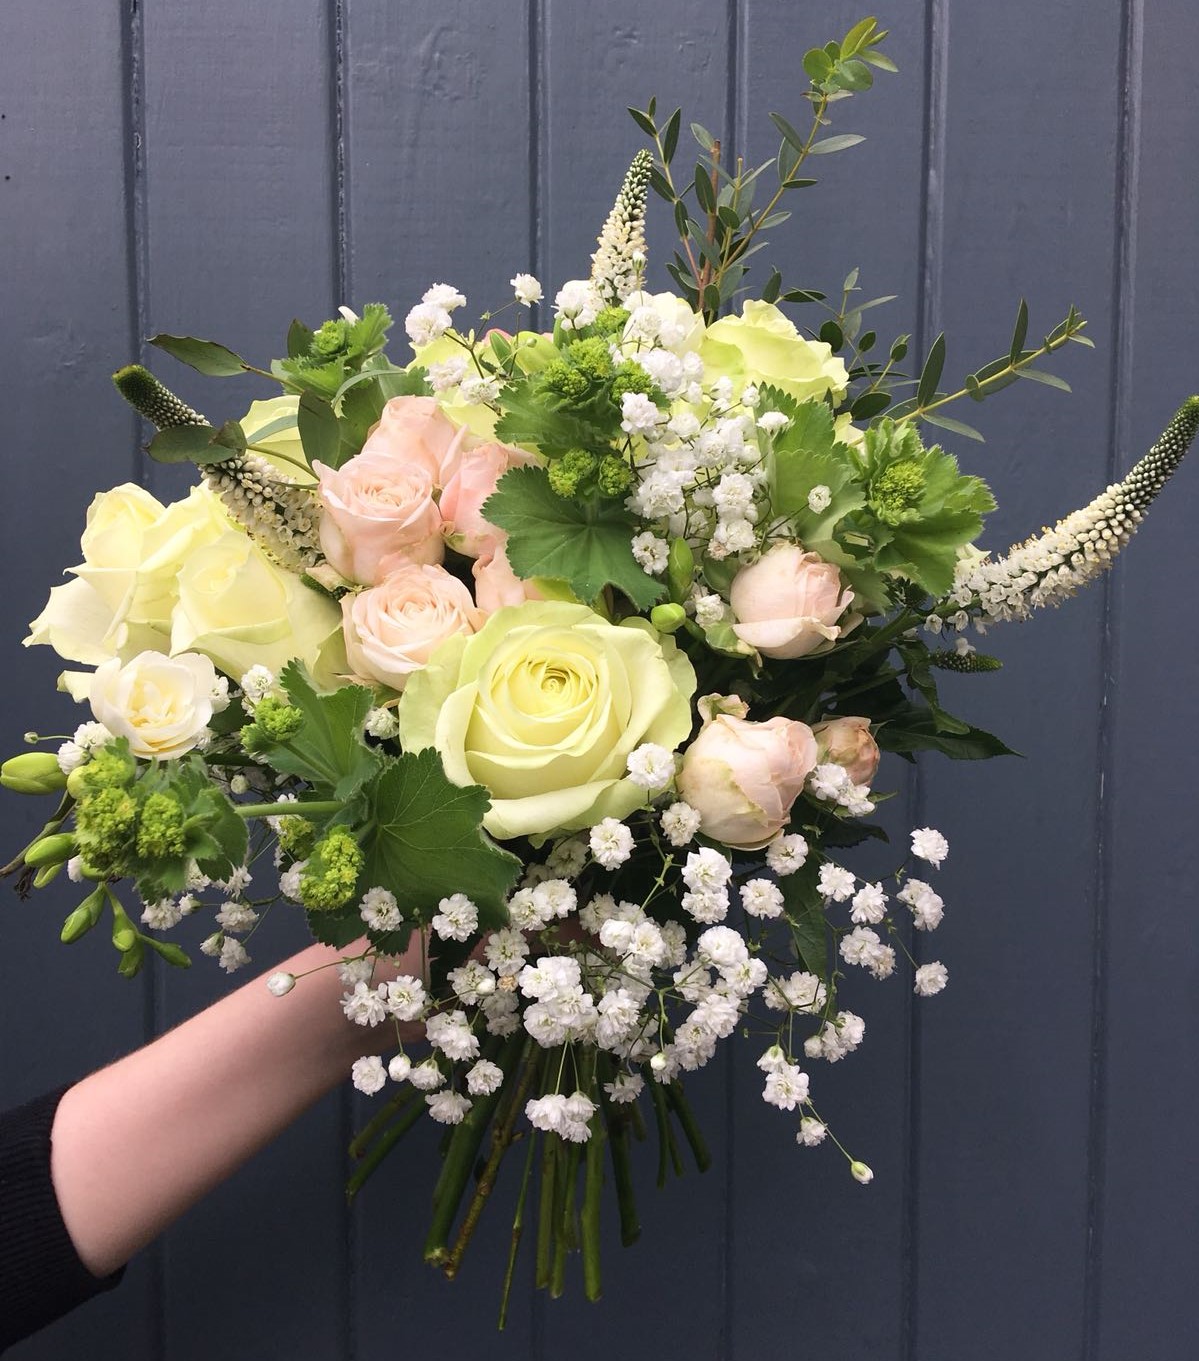 Brides bouquet with pink and cream roses, gypsophila, and white veronica